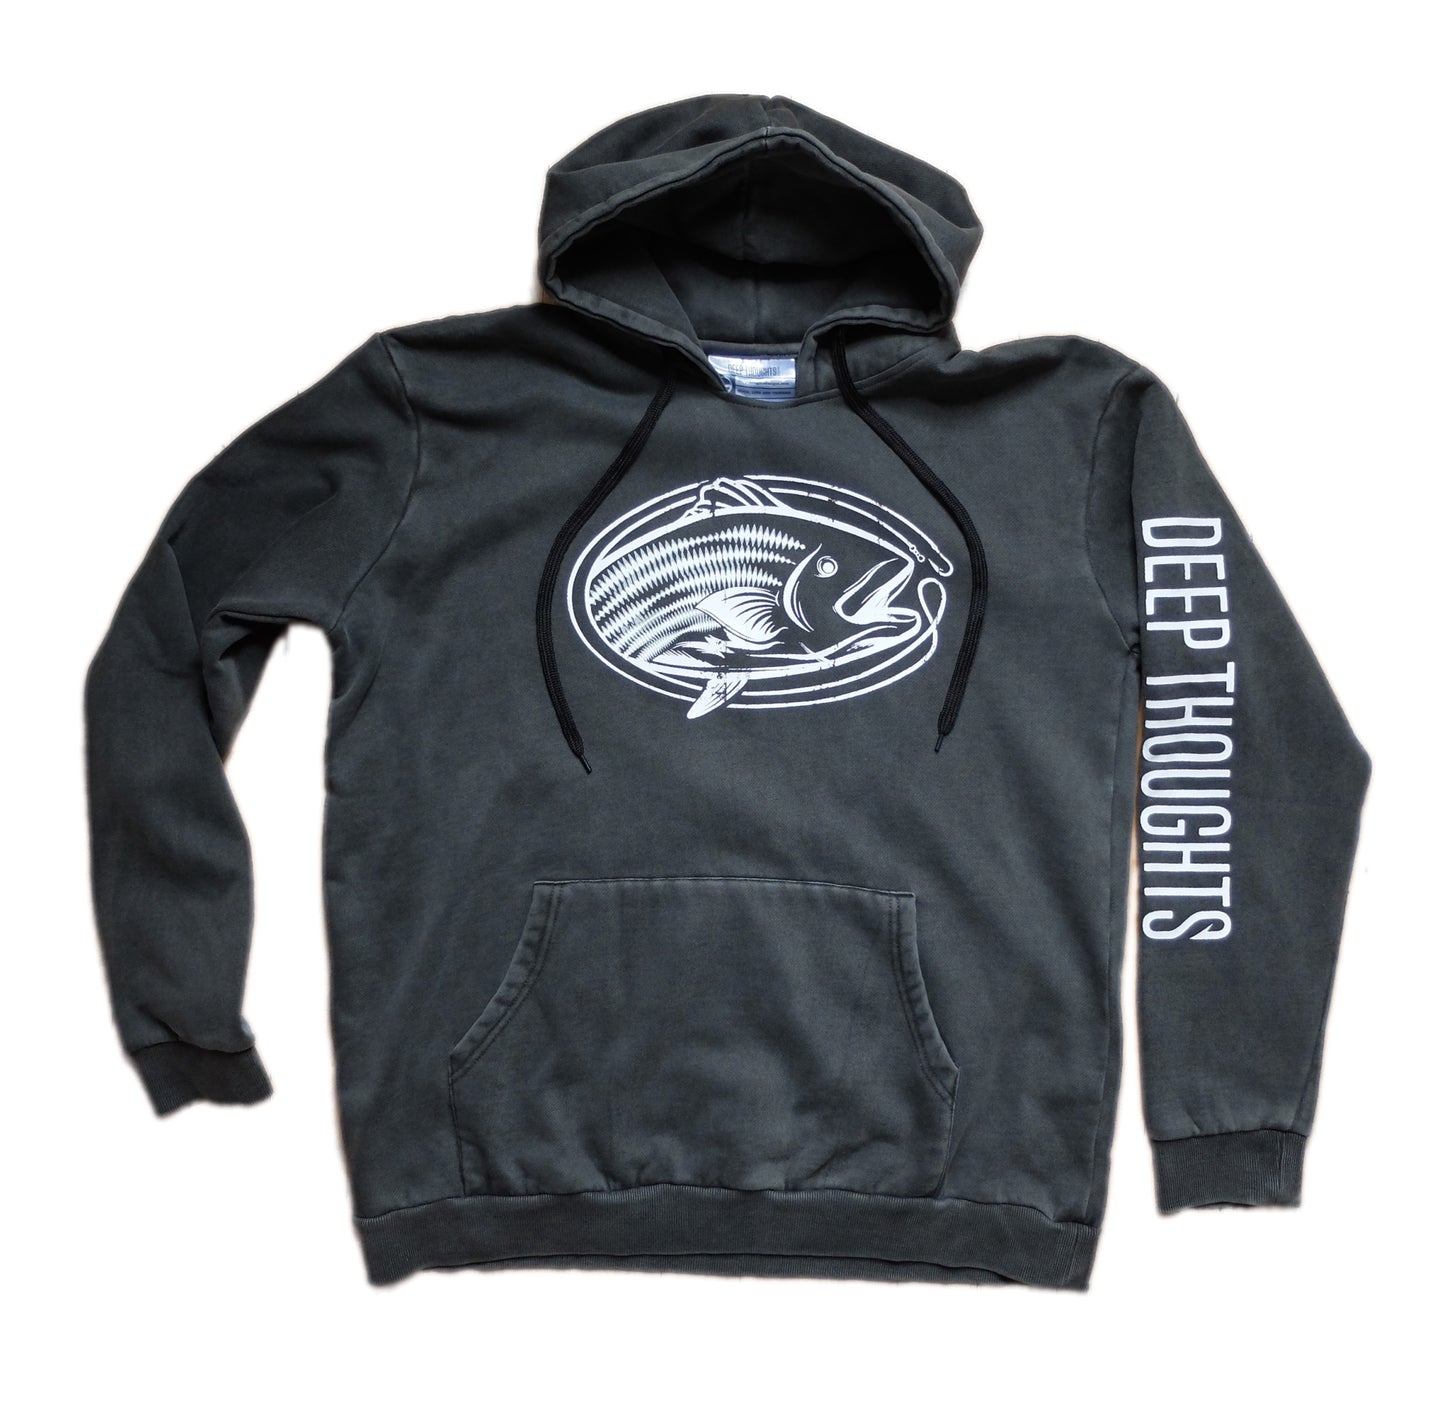 washed black garment dye hoodie with white vintage style oval-shaped striped bass graphic